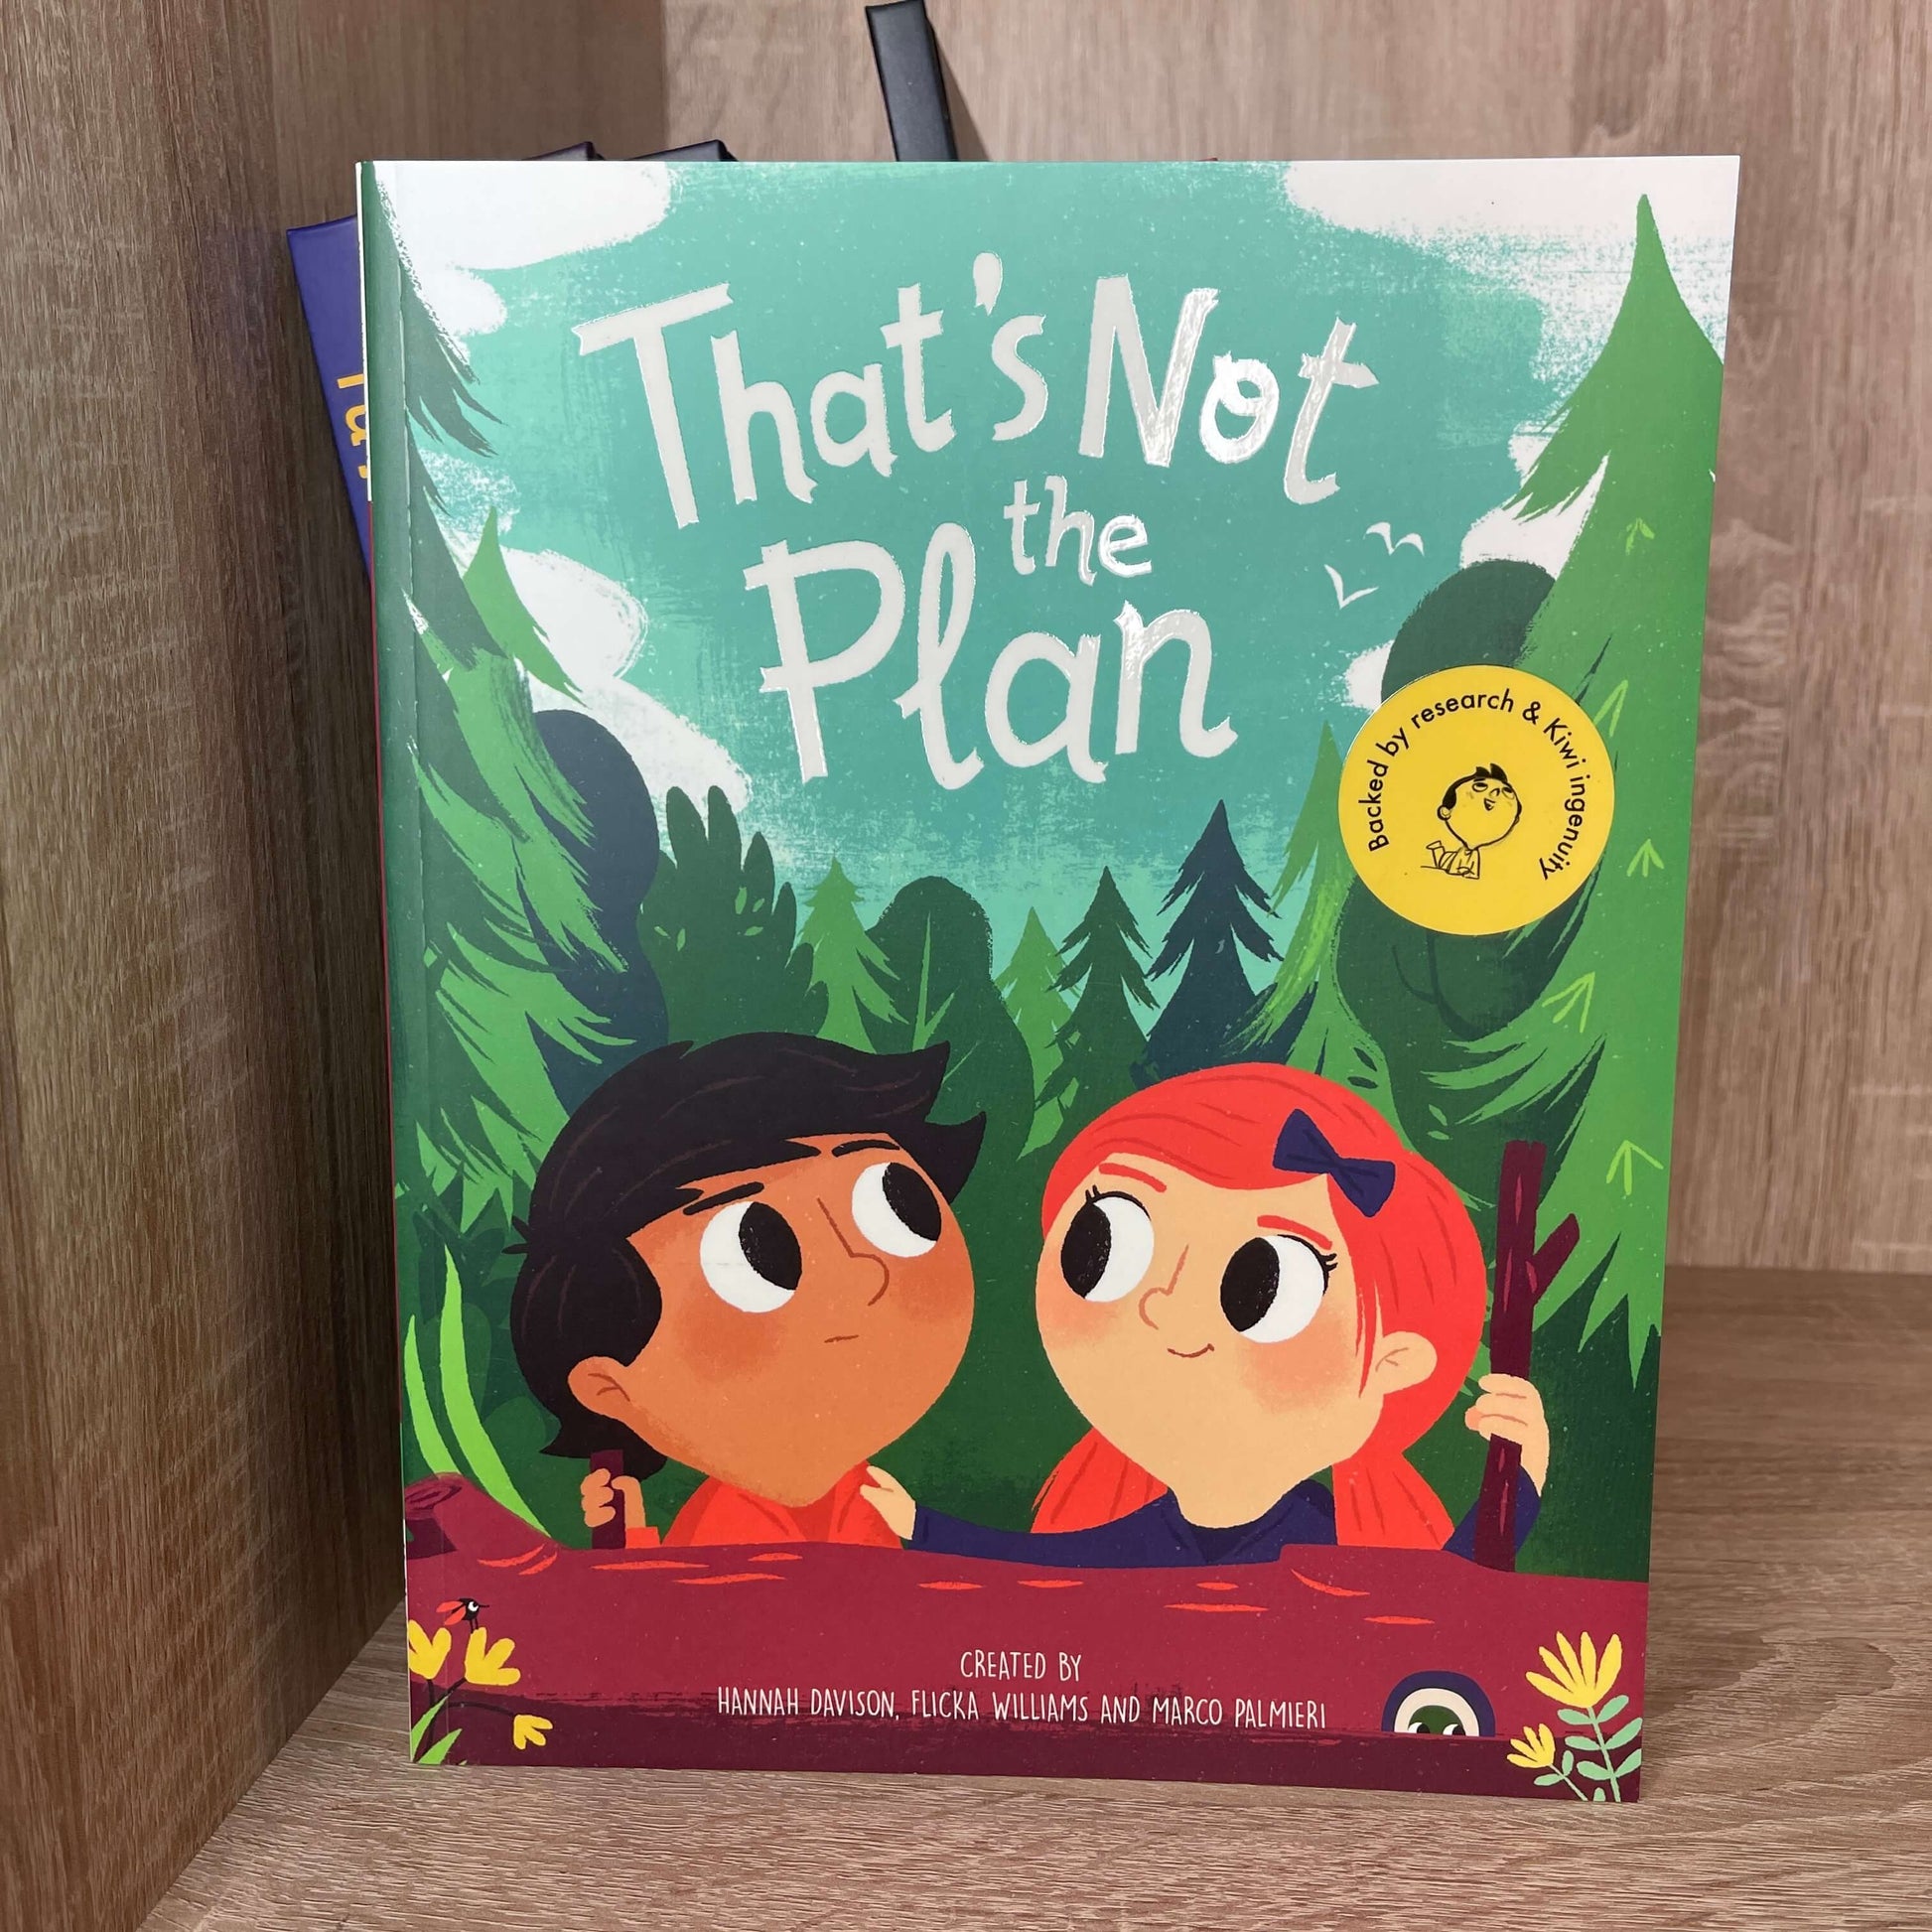 Childrens book "That's Not The Plan".